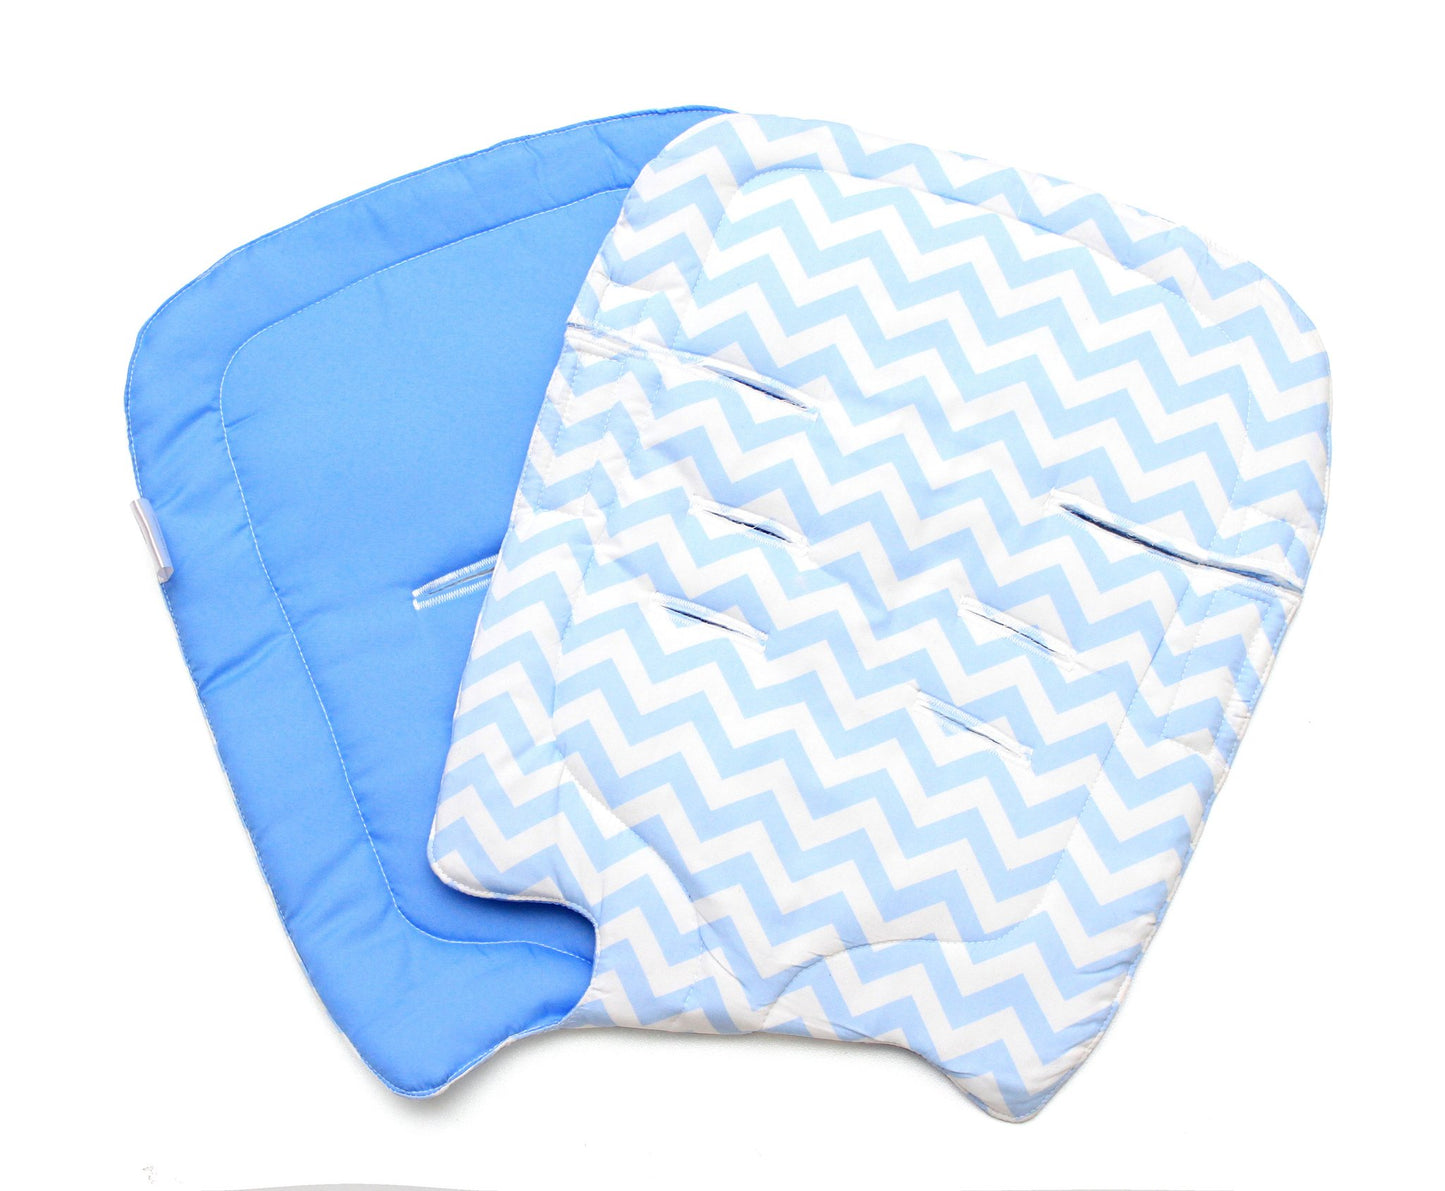 Universal Stroller Pad Set (With Strap Pads)